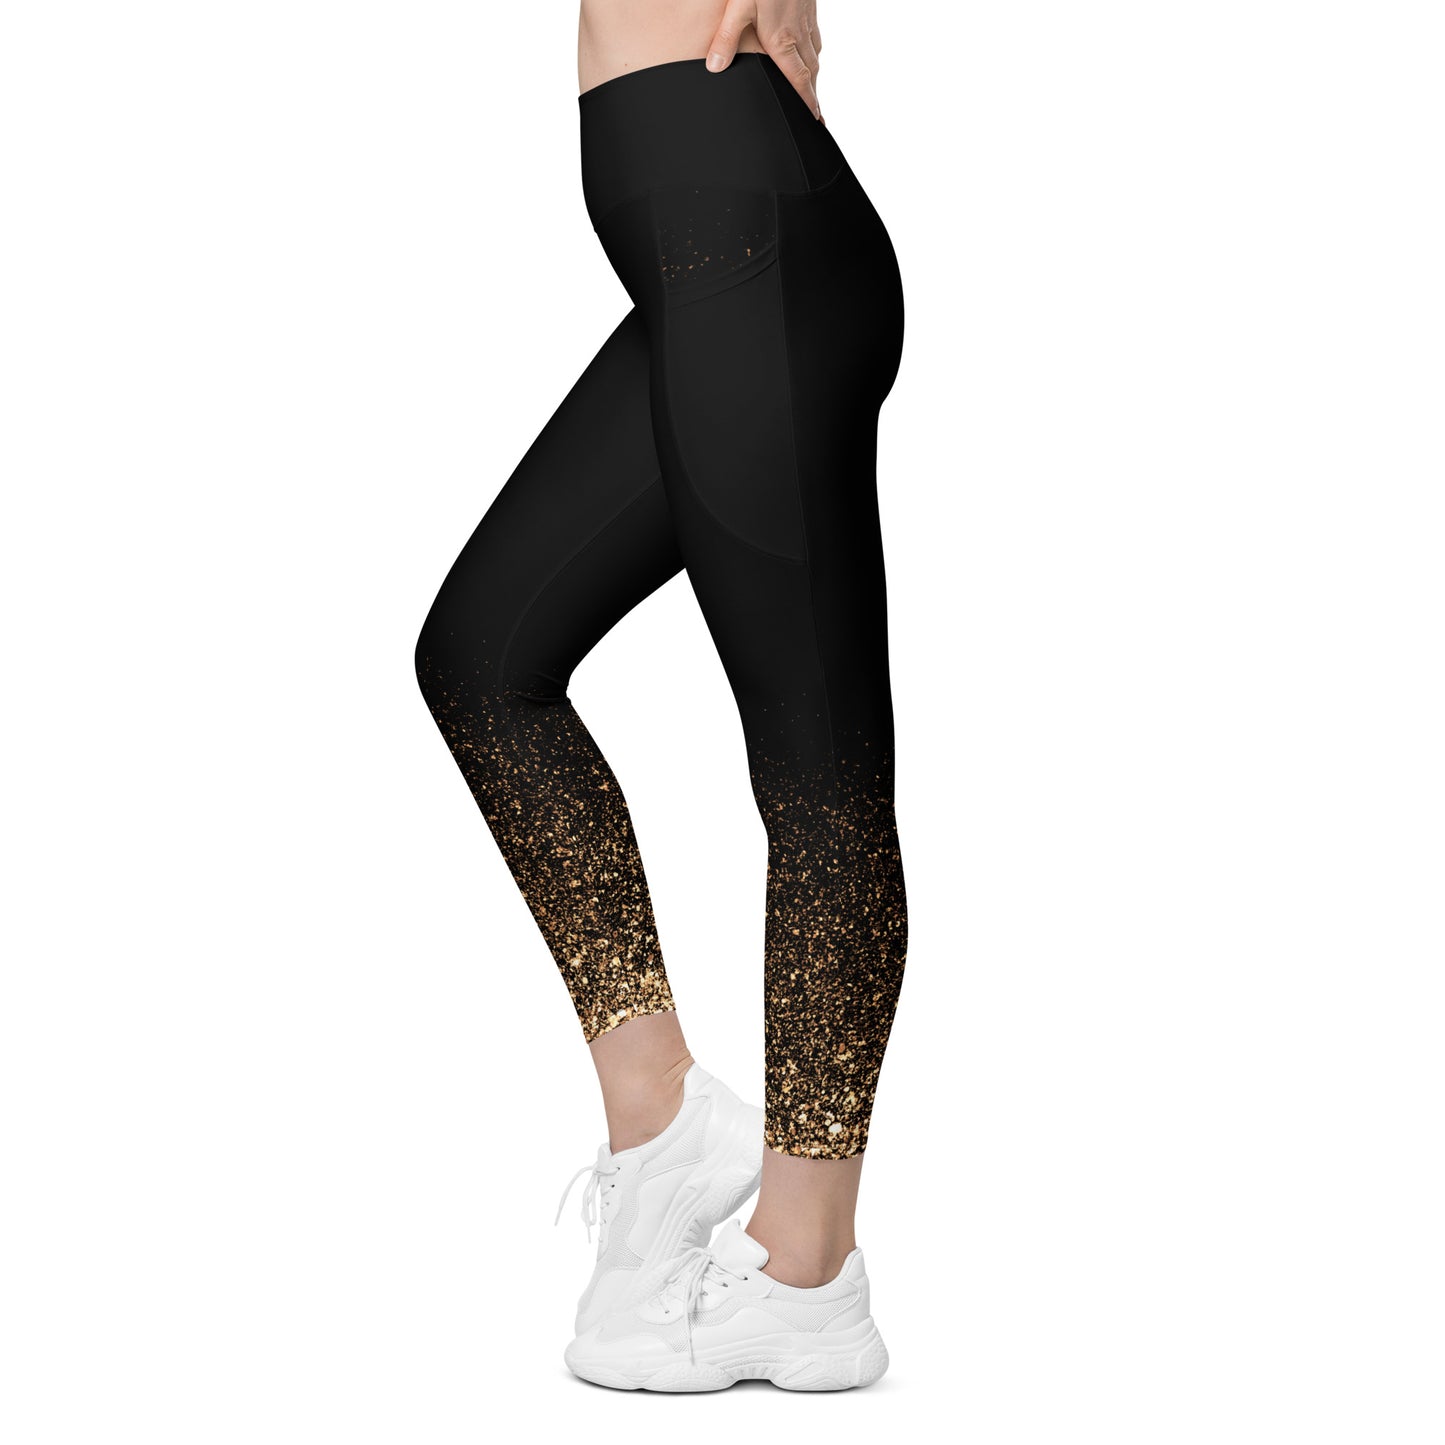 Grinnell Street Gold Leggings with pockets